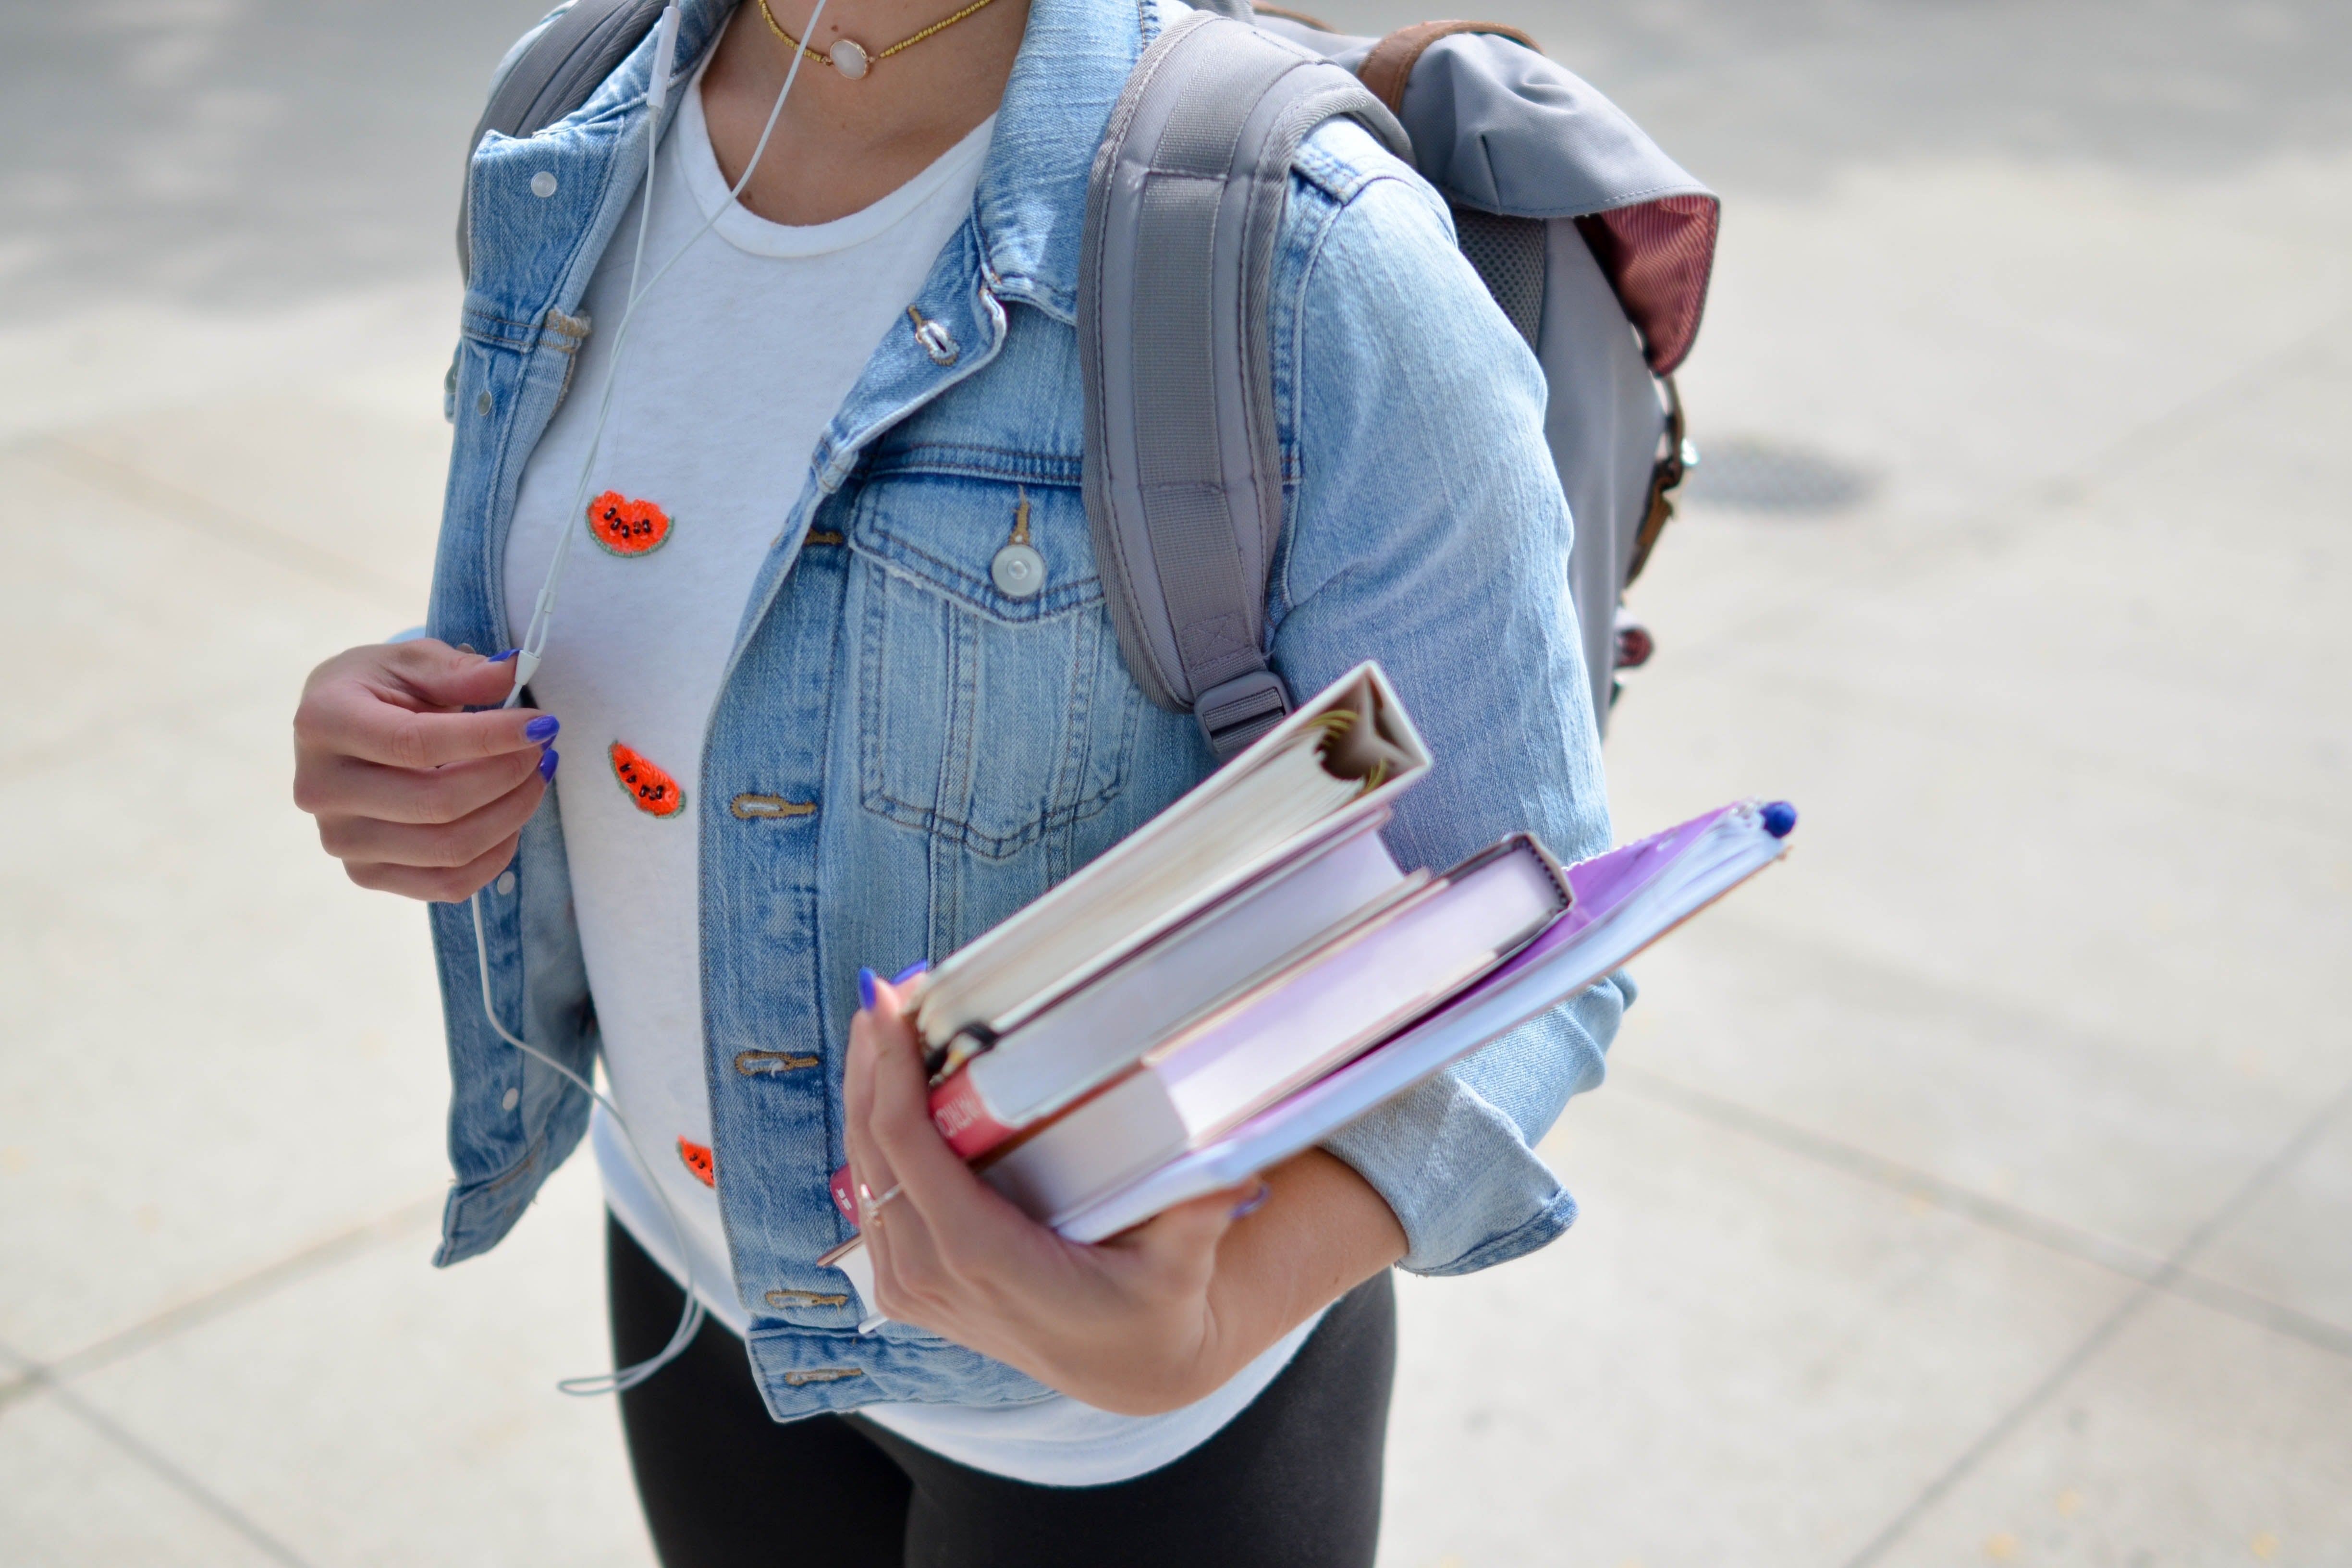 The torso of a woman wearing a backpack and holding books